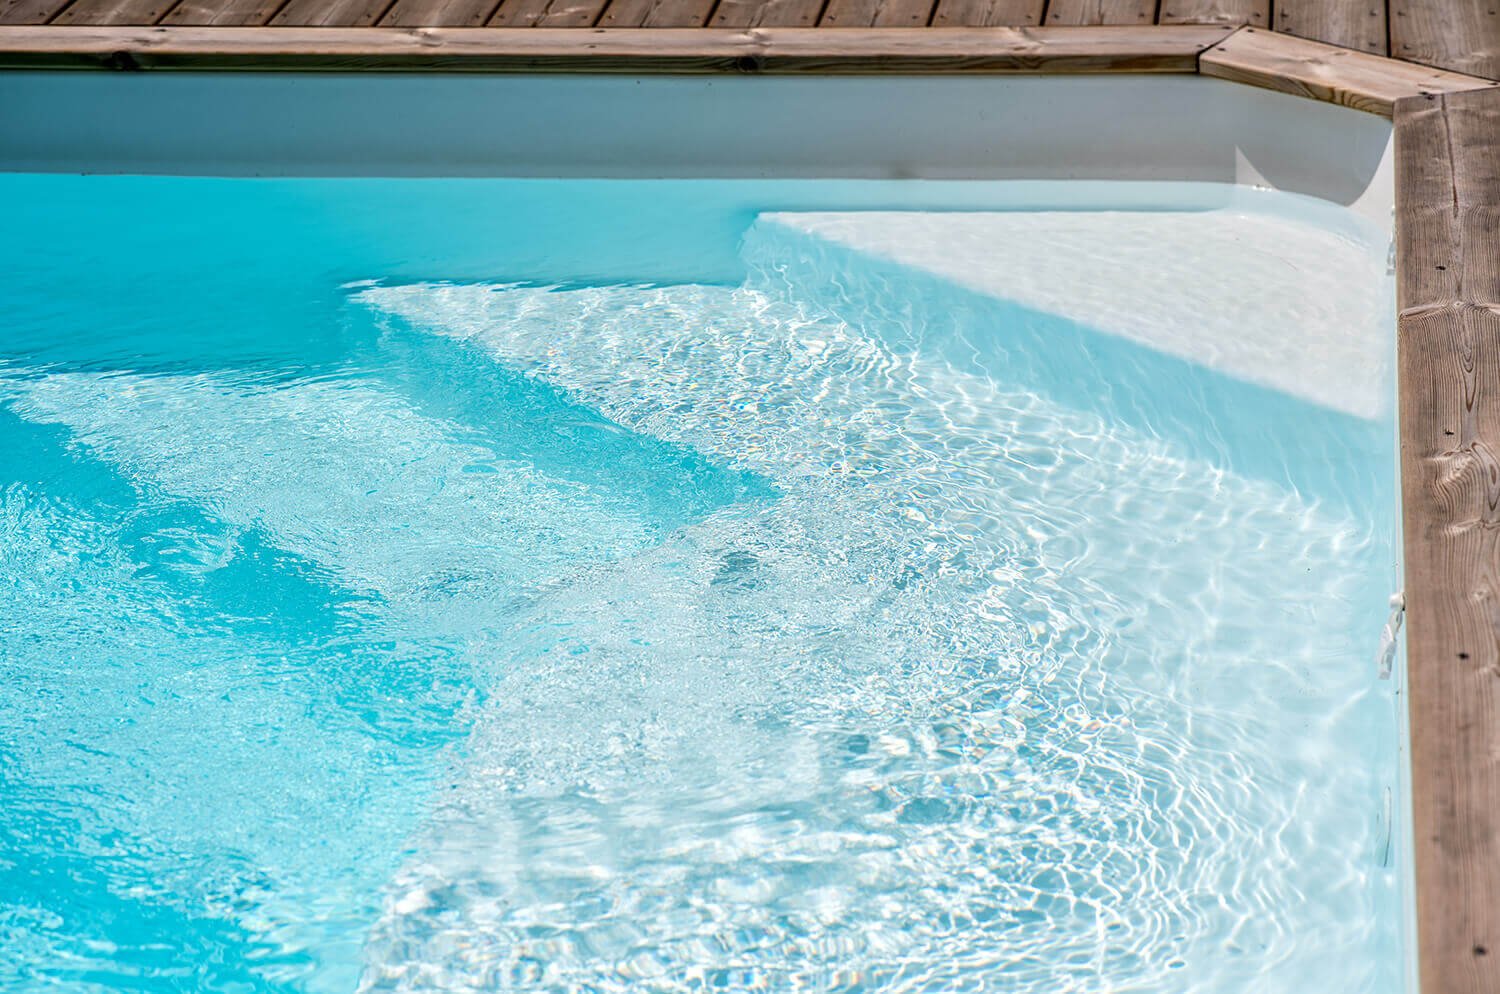 Have you been hot this summer? Plan now to build your pool